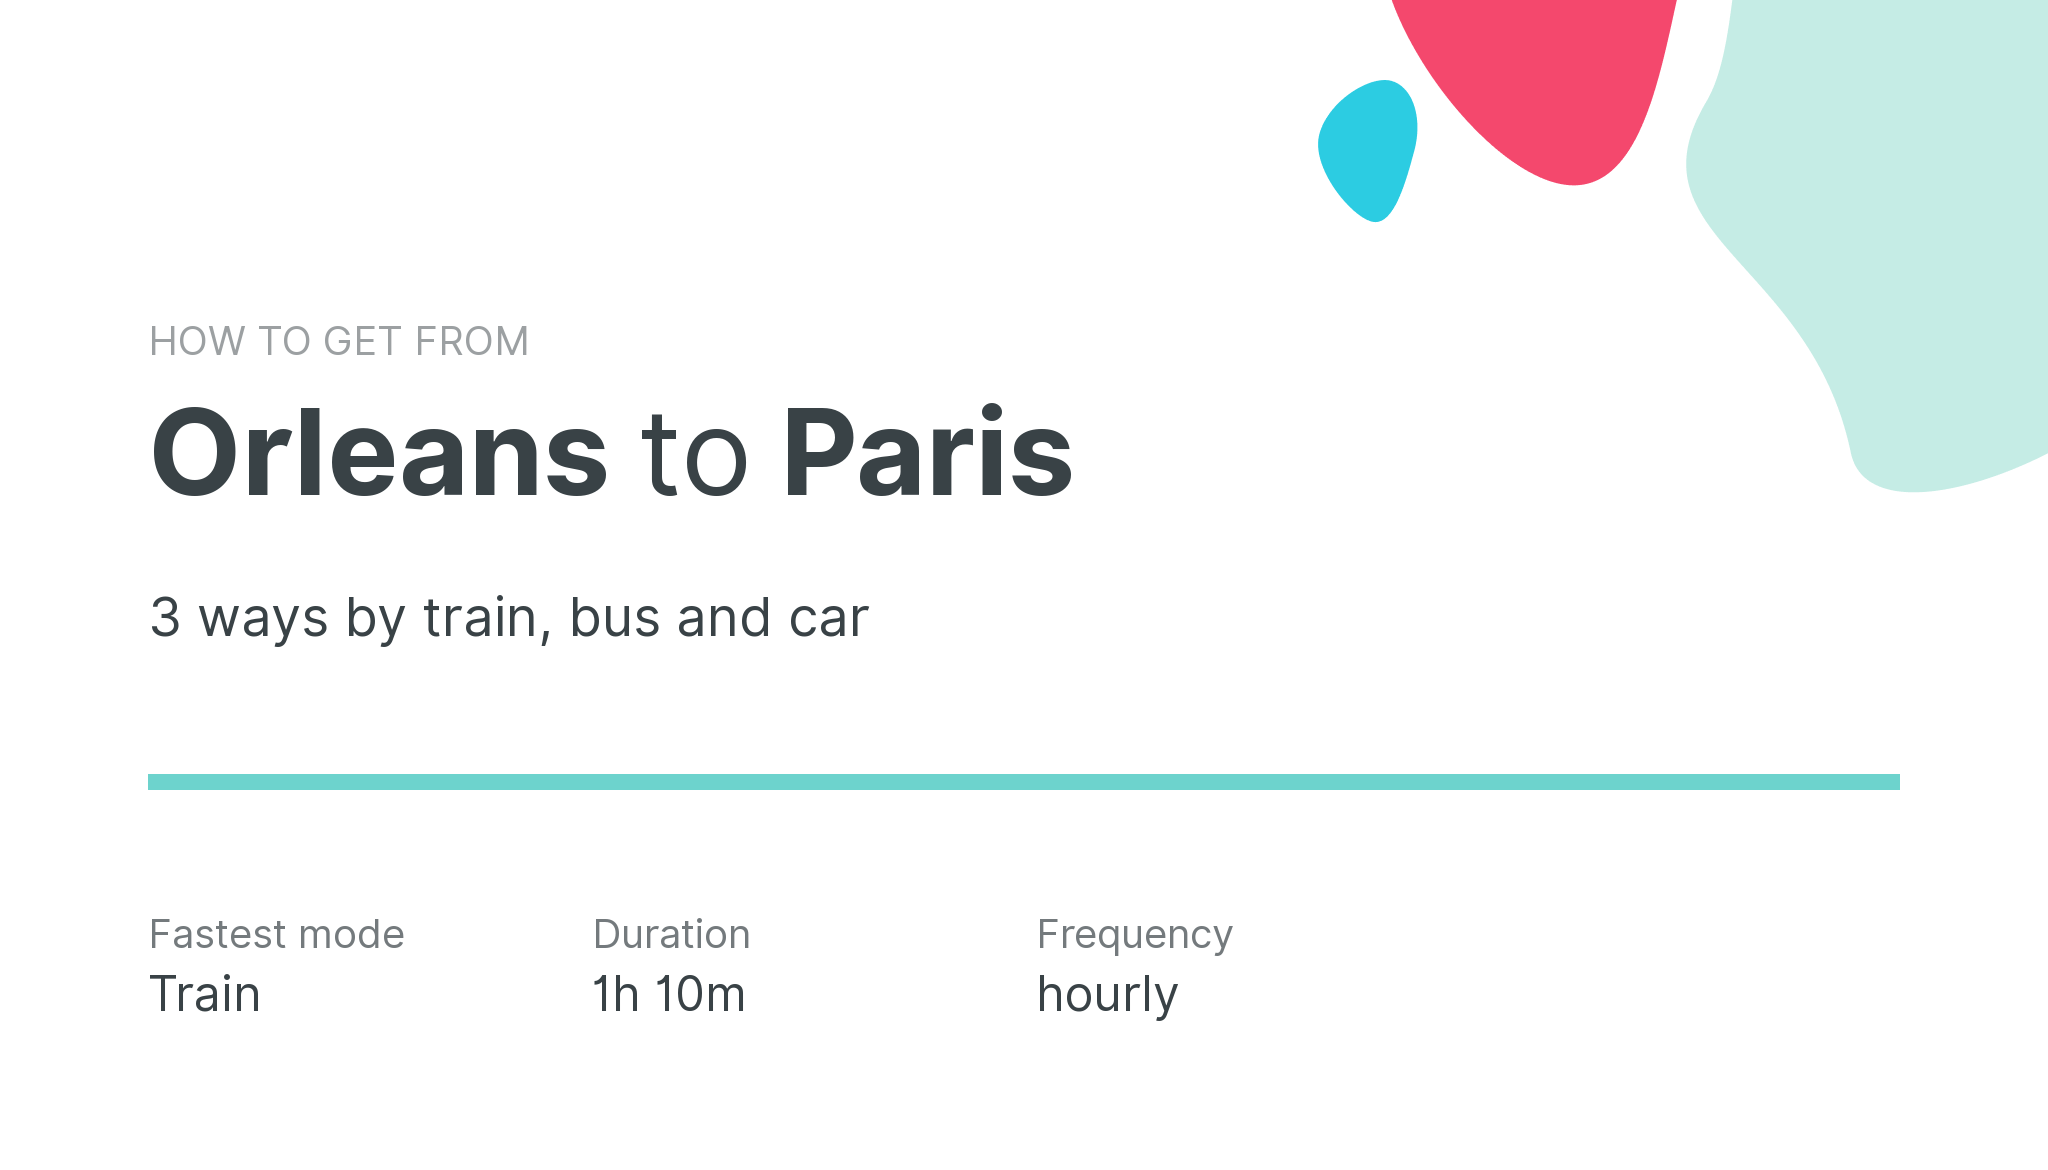 How do I get from Orleans to Paris